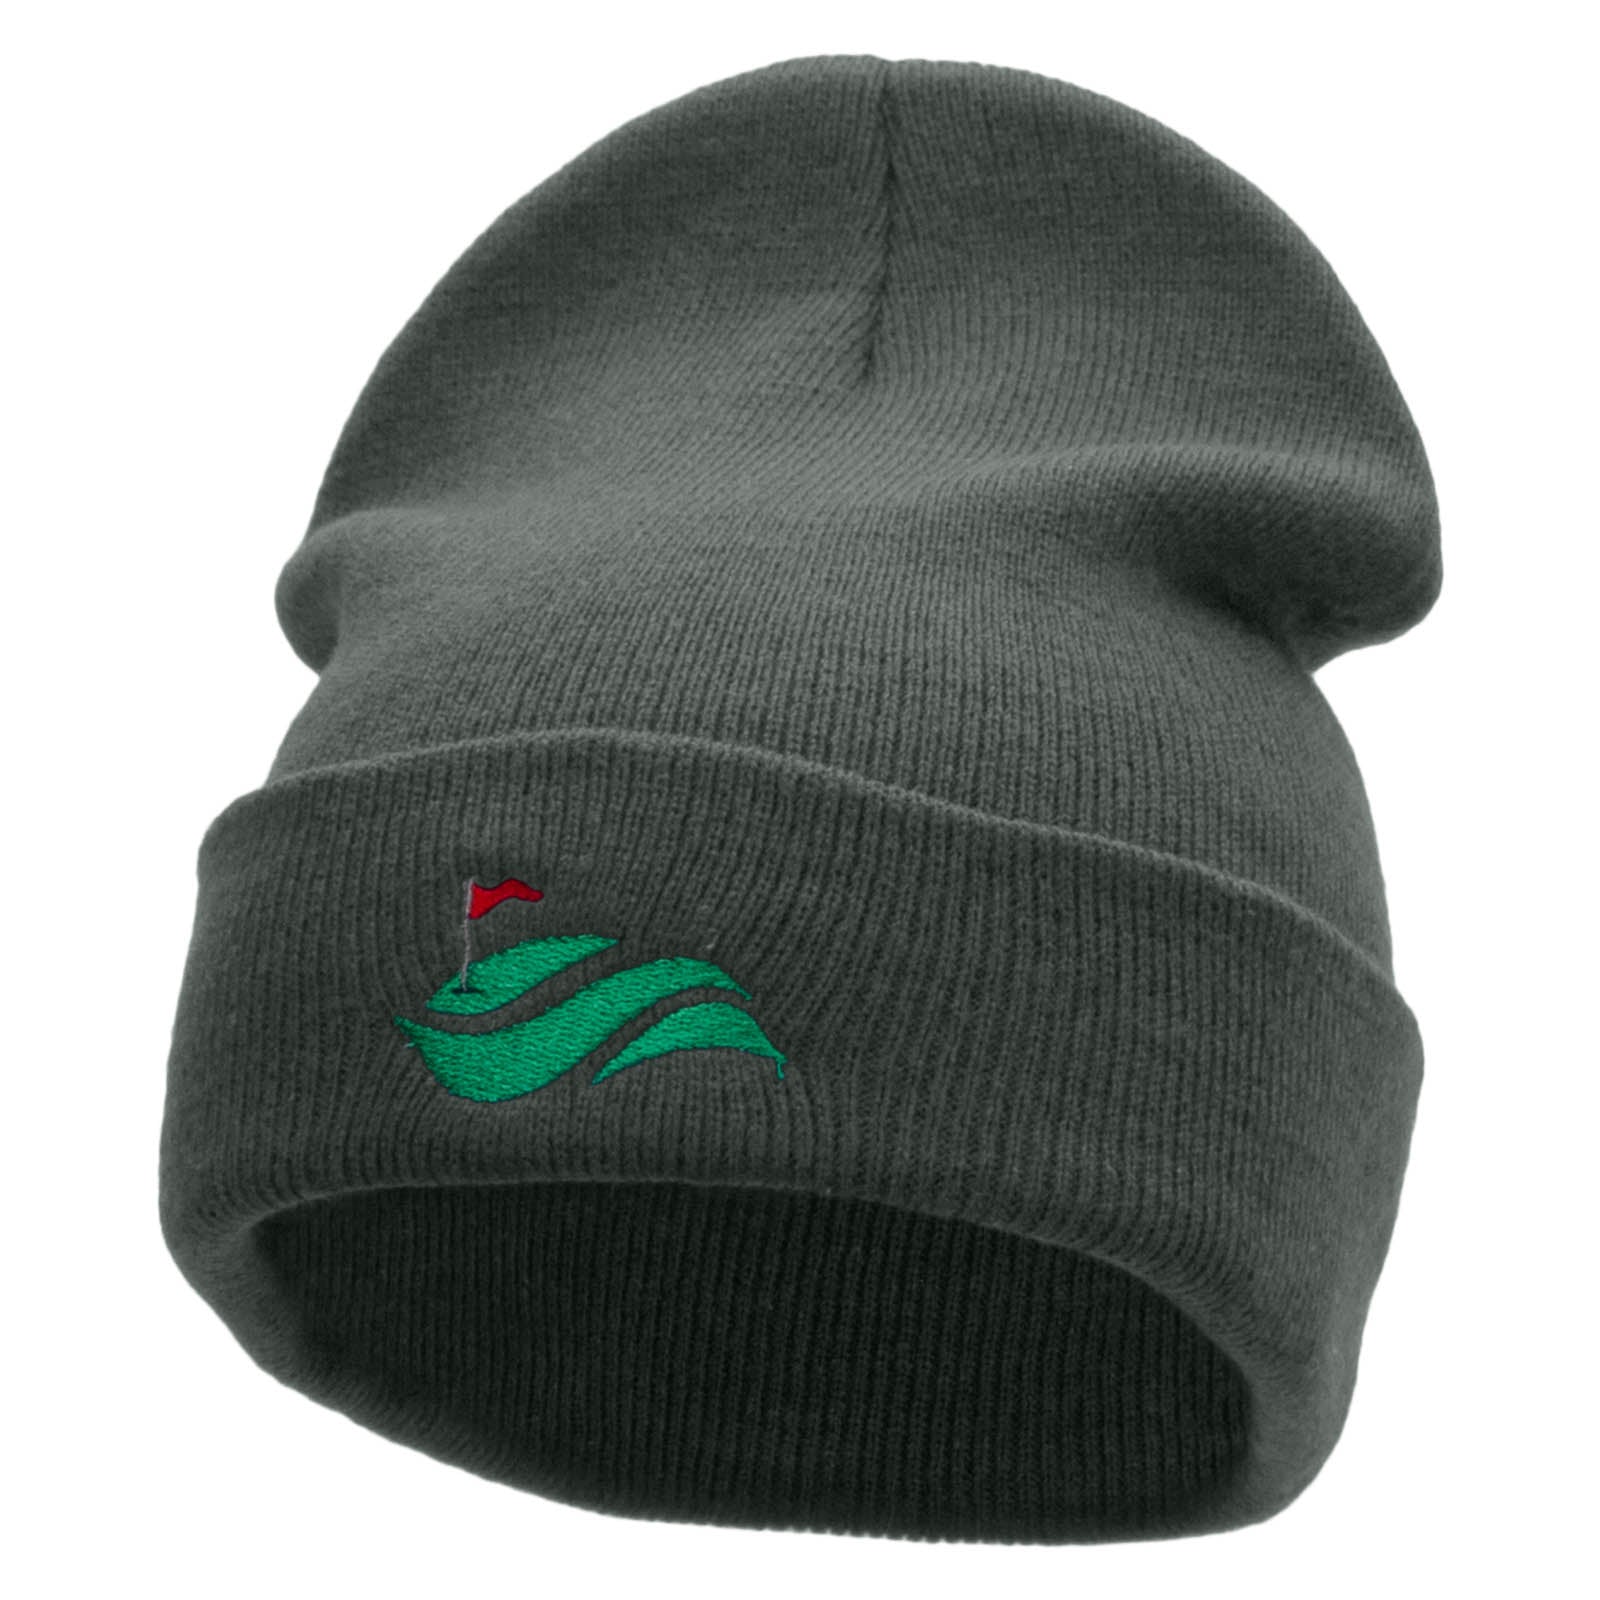 Golf Cup and Greens Embroidered 12 inch Acrylic Cuffed Long Beanie - Charcoal OSFM